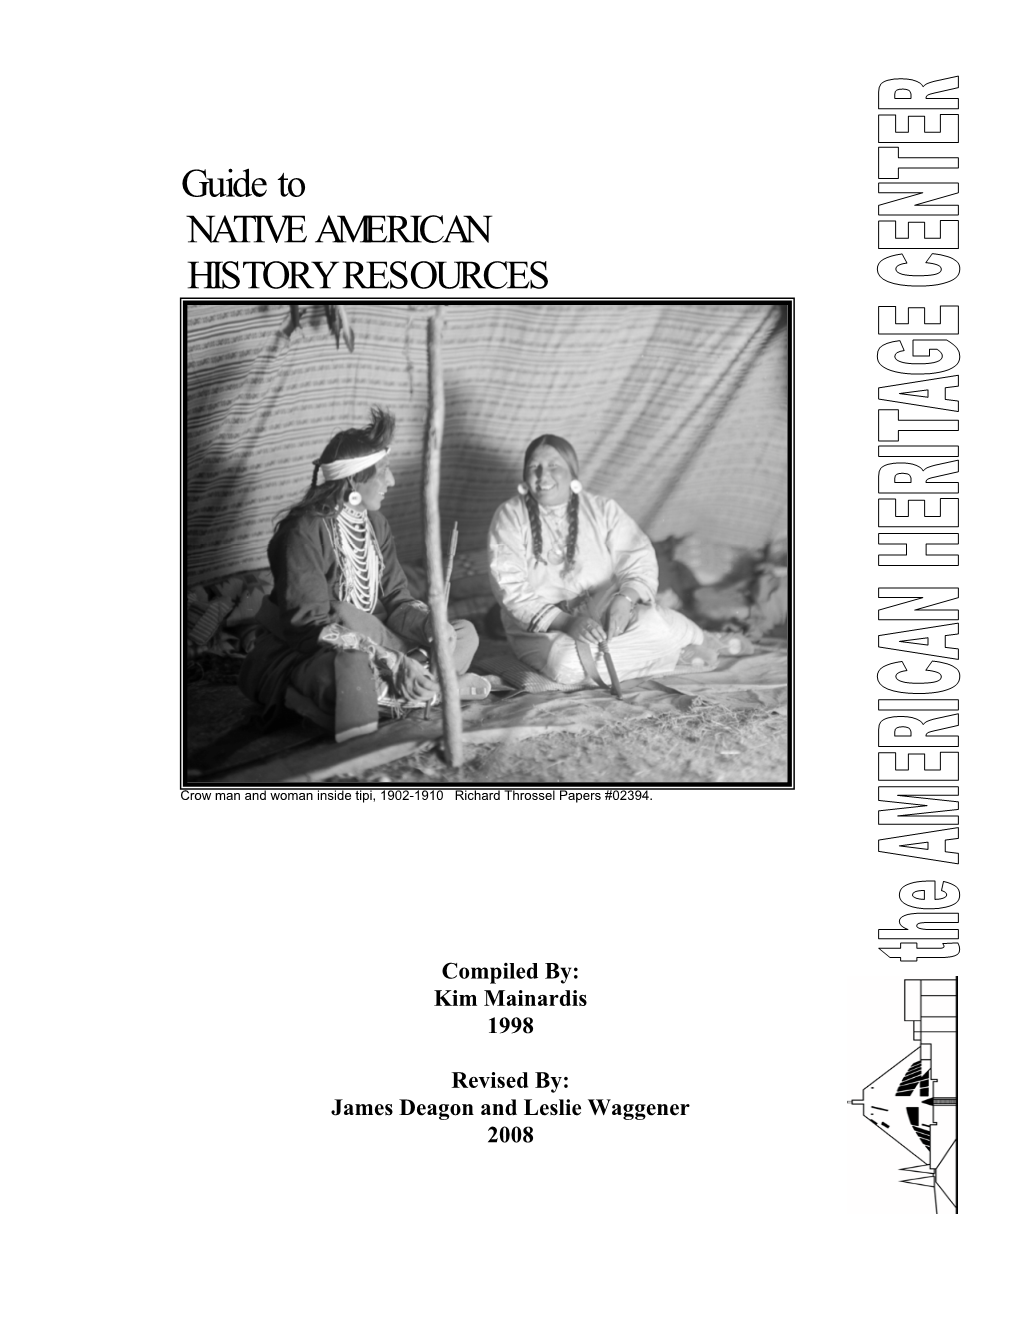 Guide to NATIVE AMERICAN HISTORY RESOURCES